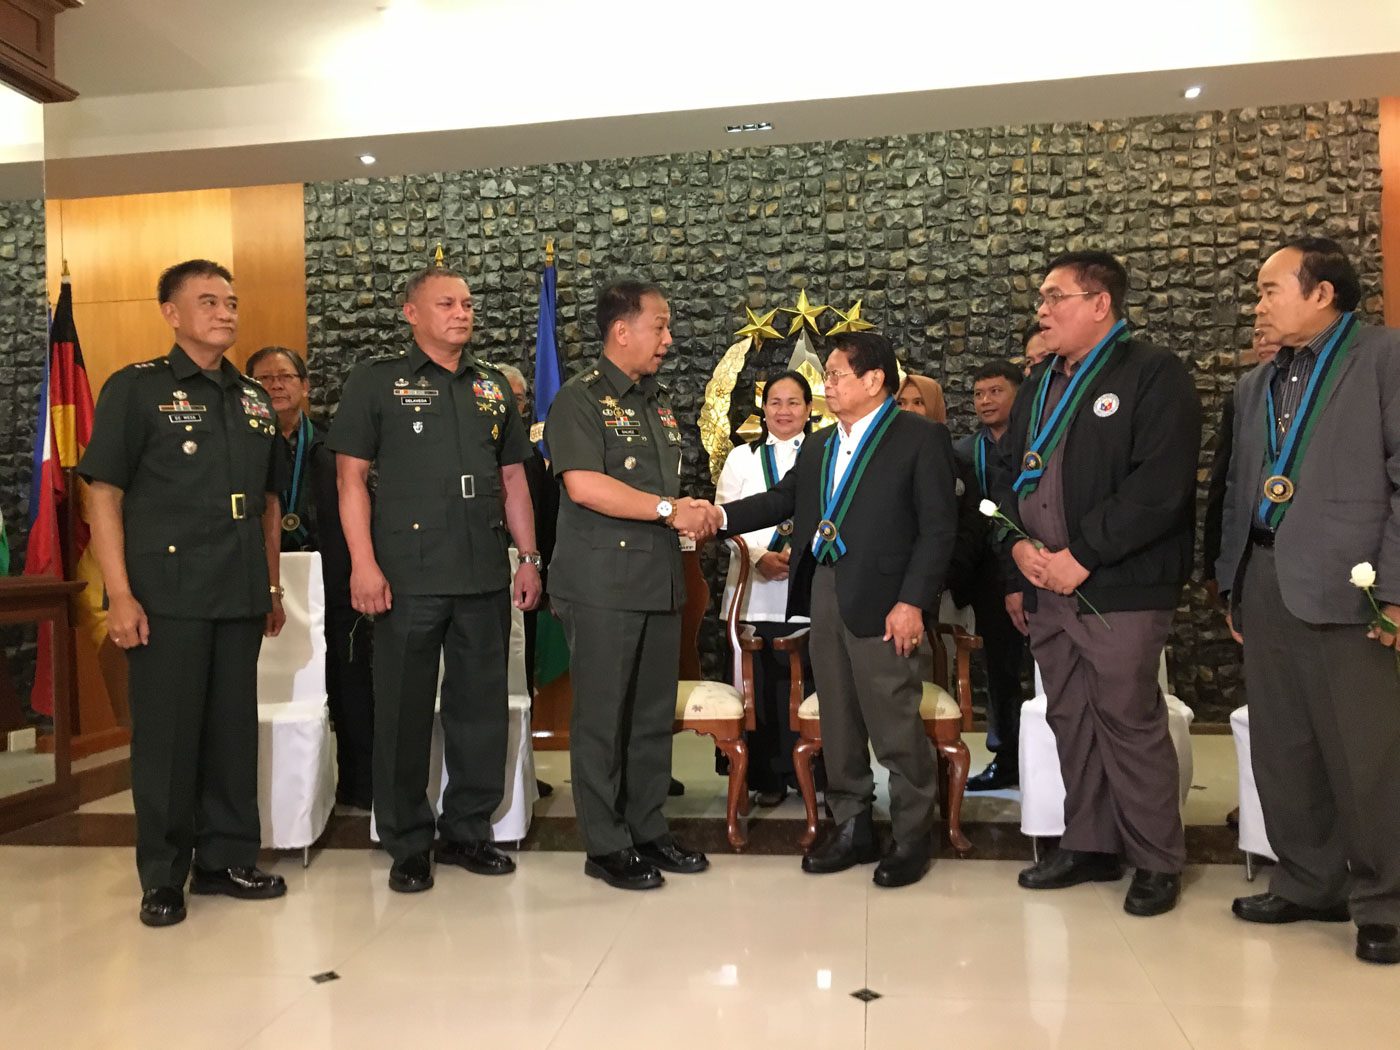 Historic visit: PH military welcomes MILF to Camp Aguinaldo